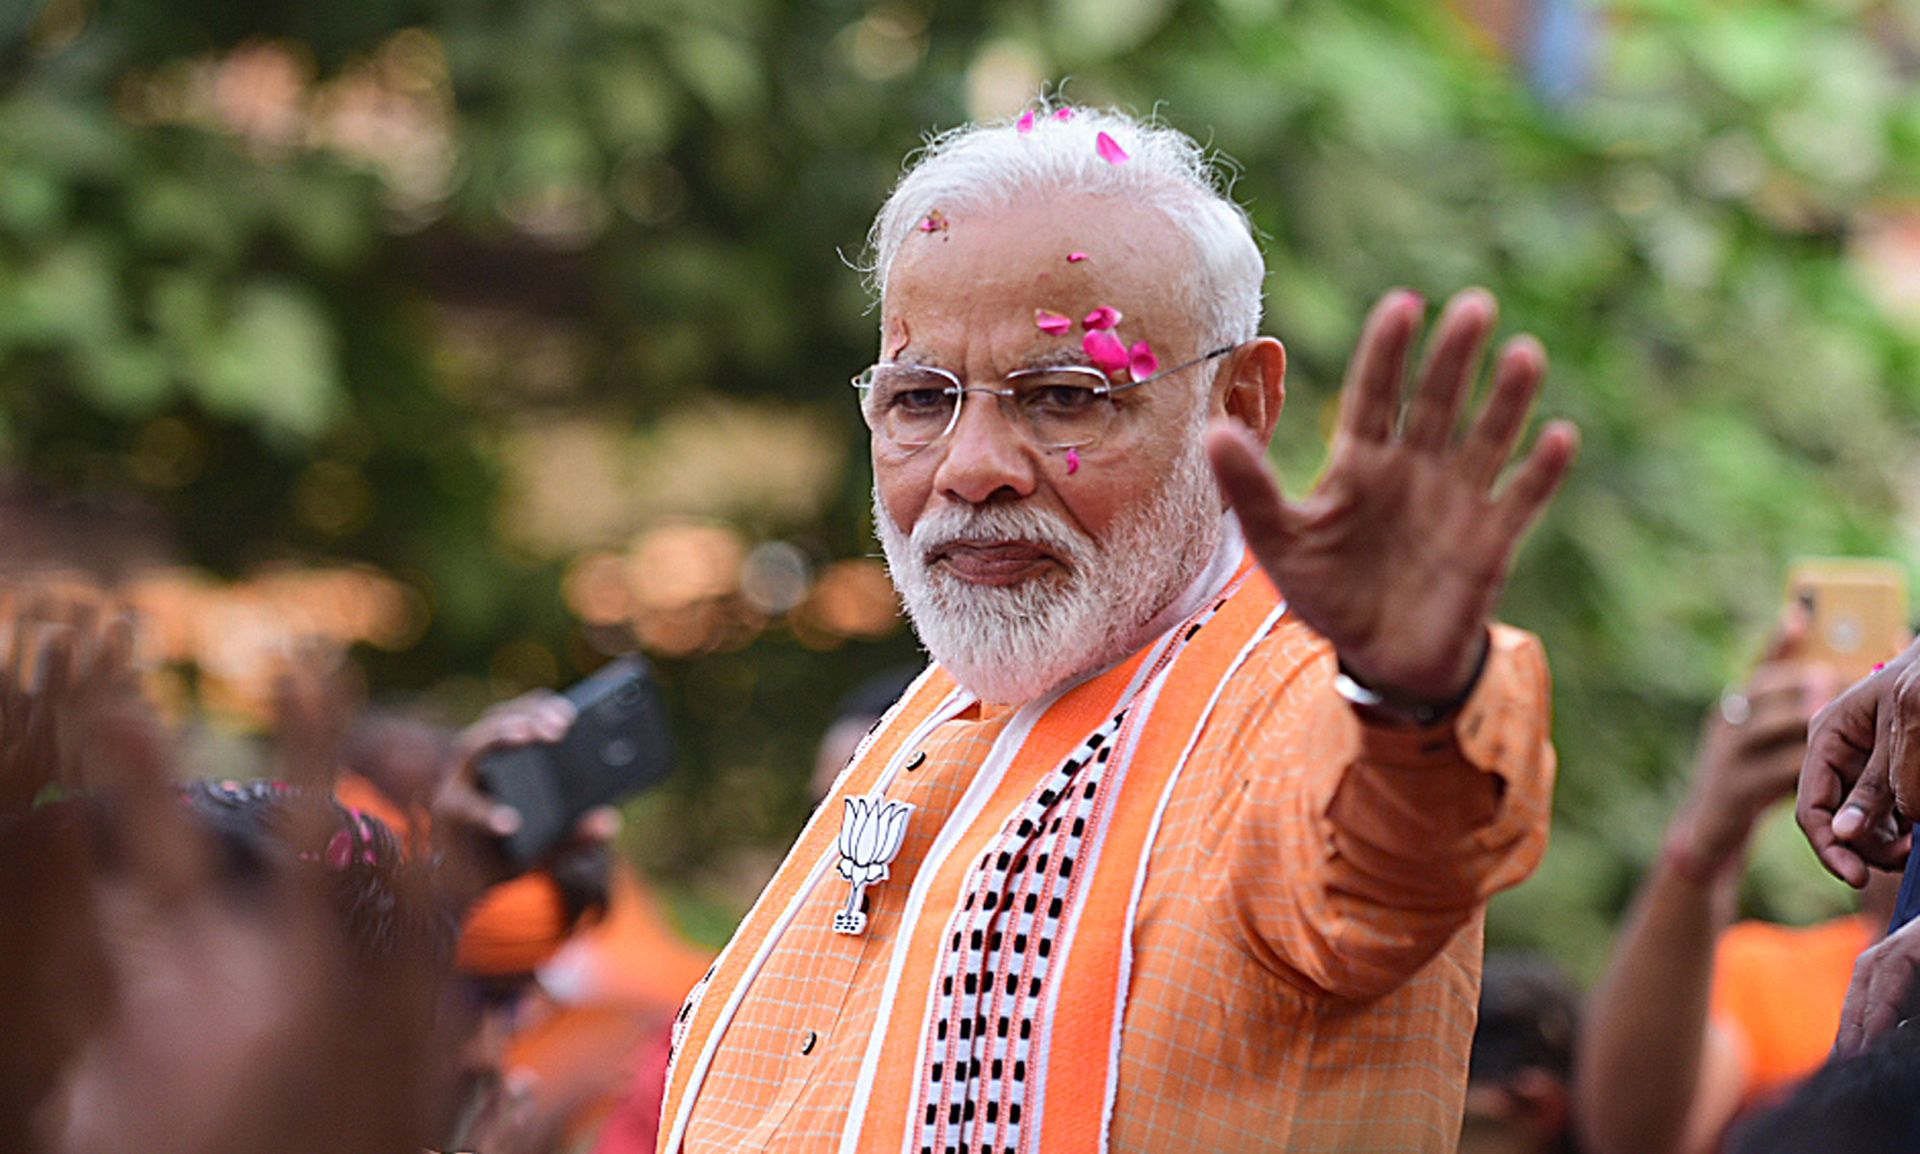 epa07594086 (FILE) - Top Bhartya Janta party (BJP) leader and Indian Prime Minister Narendra Modi waves to his supporters during a road show in Varanasi, Uttar Pradesh, India, 25 April 2019 (reissued 23 May 2019). According to reports, Modi's BJP party has won the Indian elections.  EPA/PRABHAT KUMAR VERMA